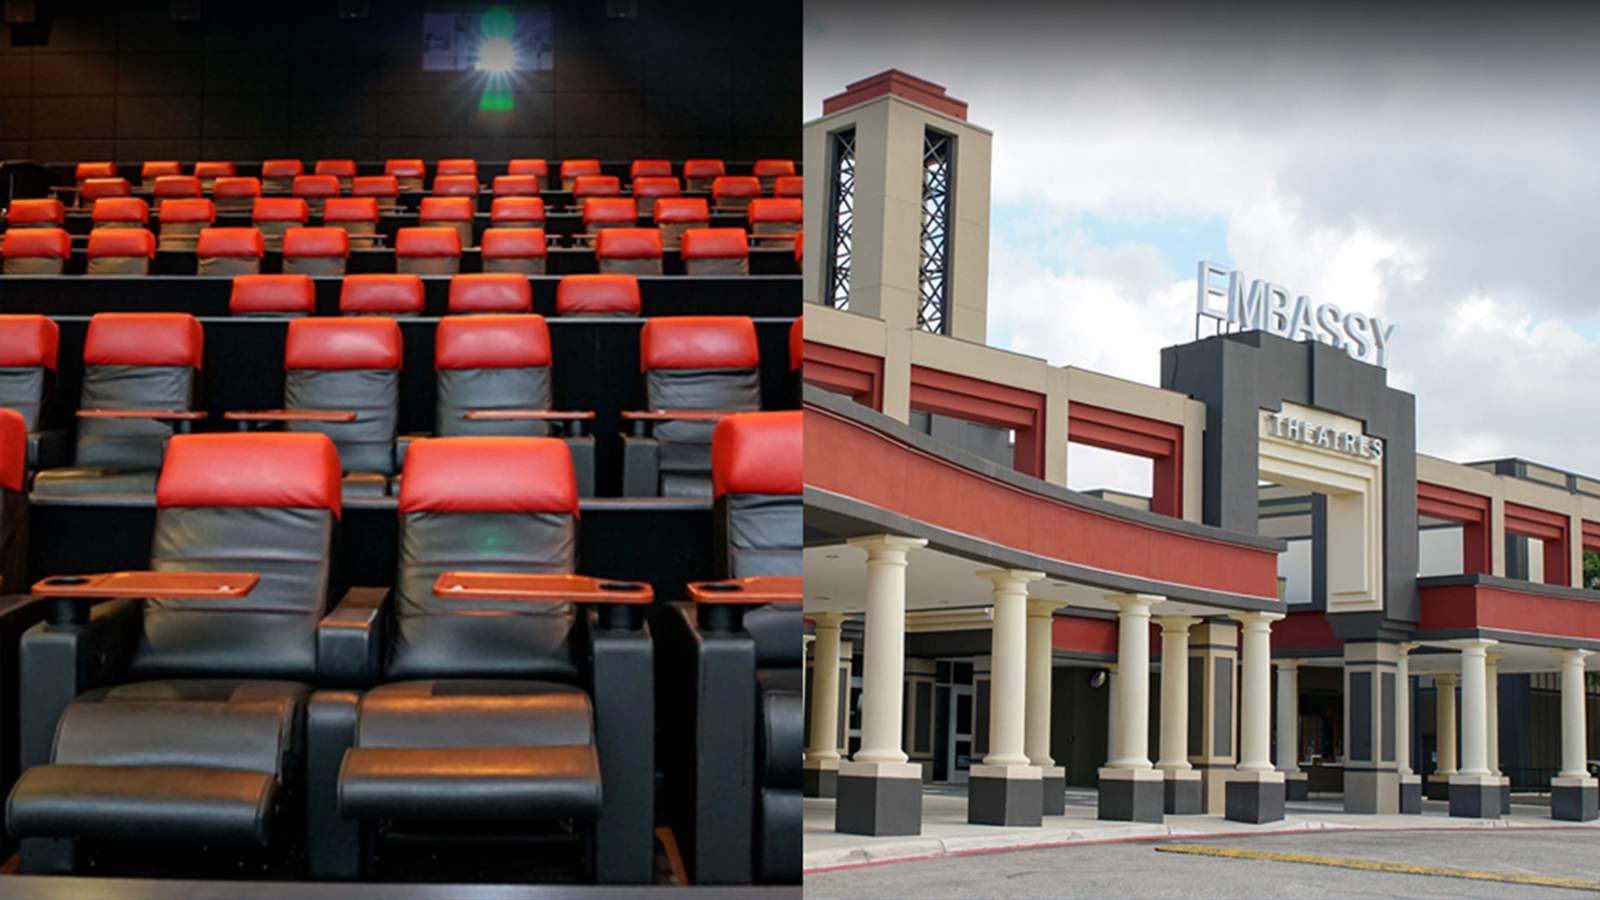 Santikos Embassy to reopen Friday with $5 movies